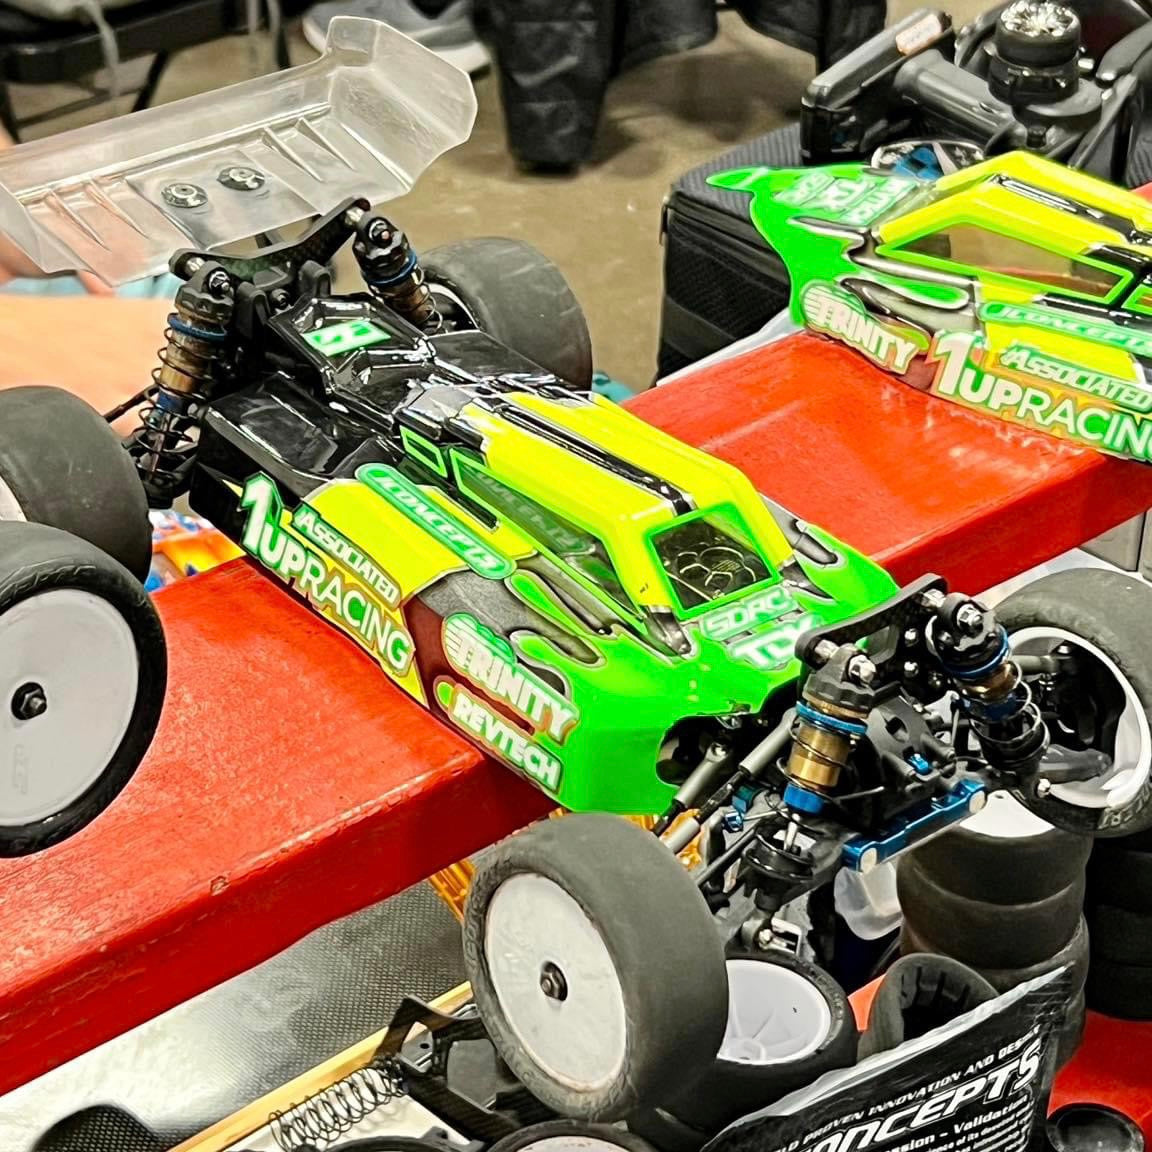 Matty G and Jake looking good in the pits at Hobby Action